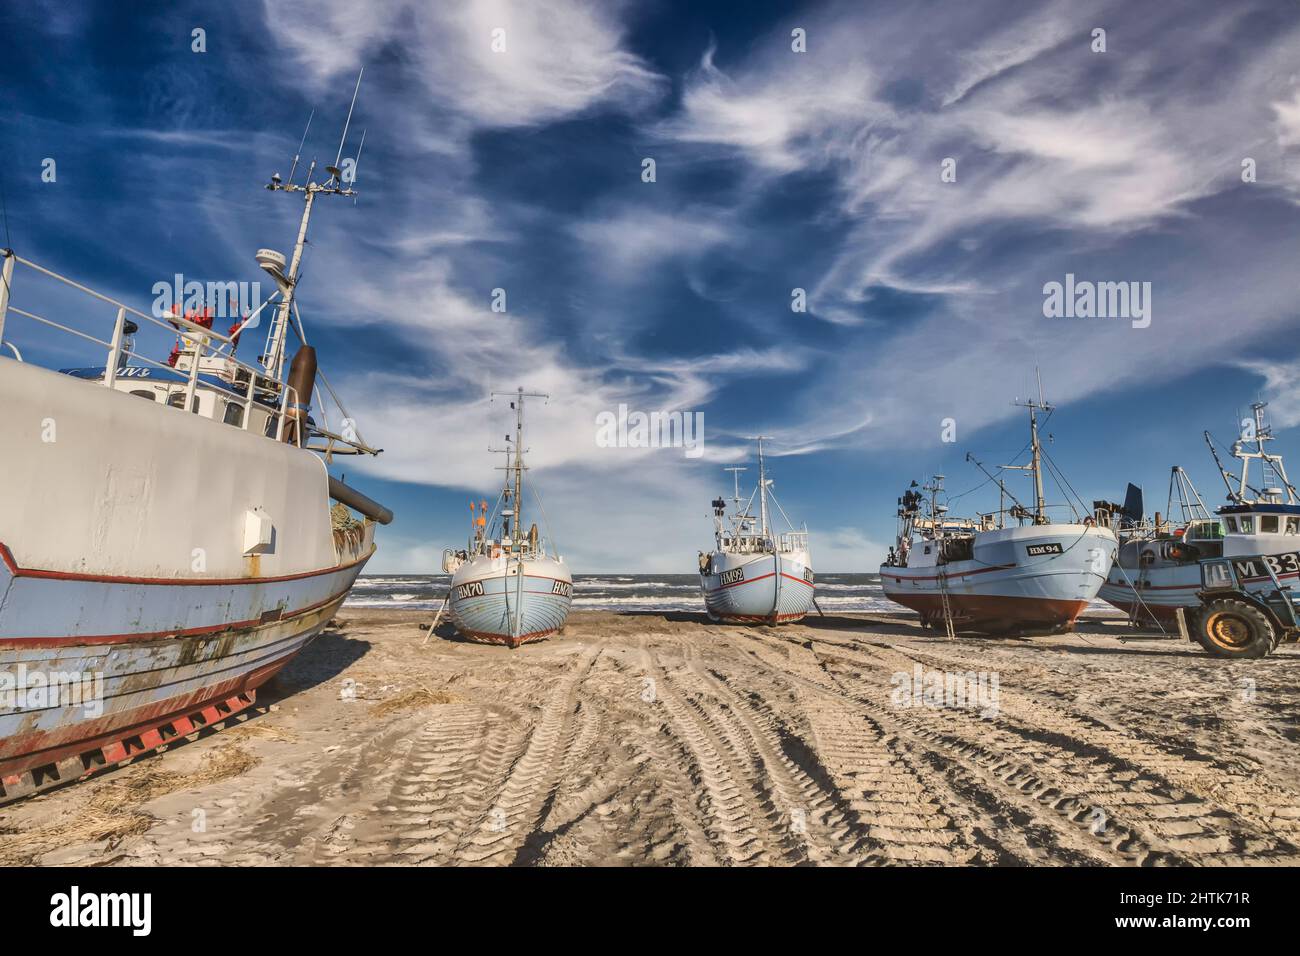 Thorup strand cutters fishing vessels for traditional fishery at the North Sea coast in Denmark Stock Photo